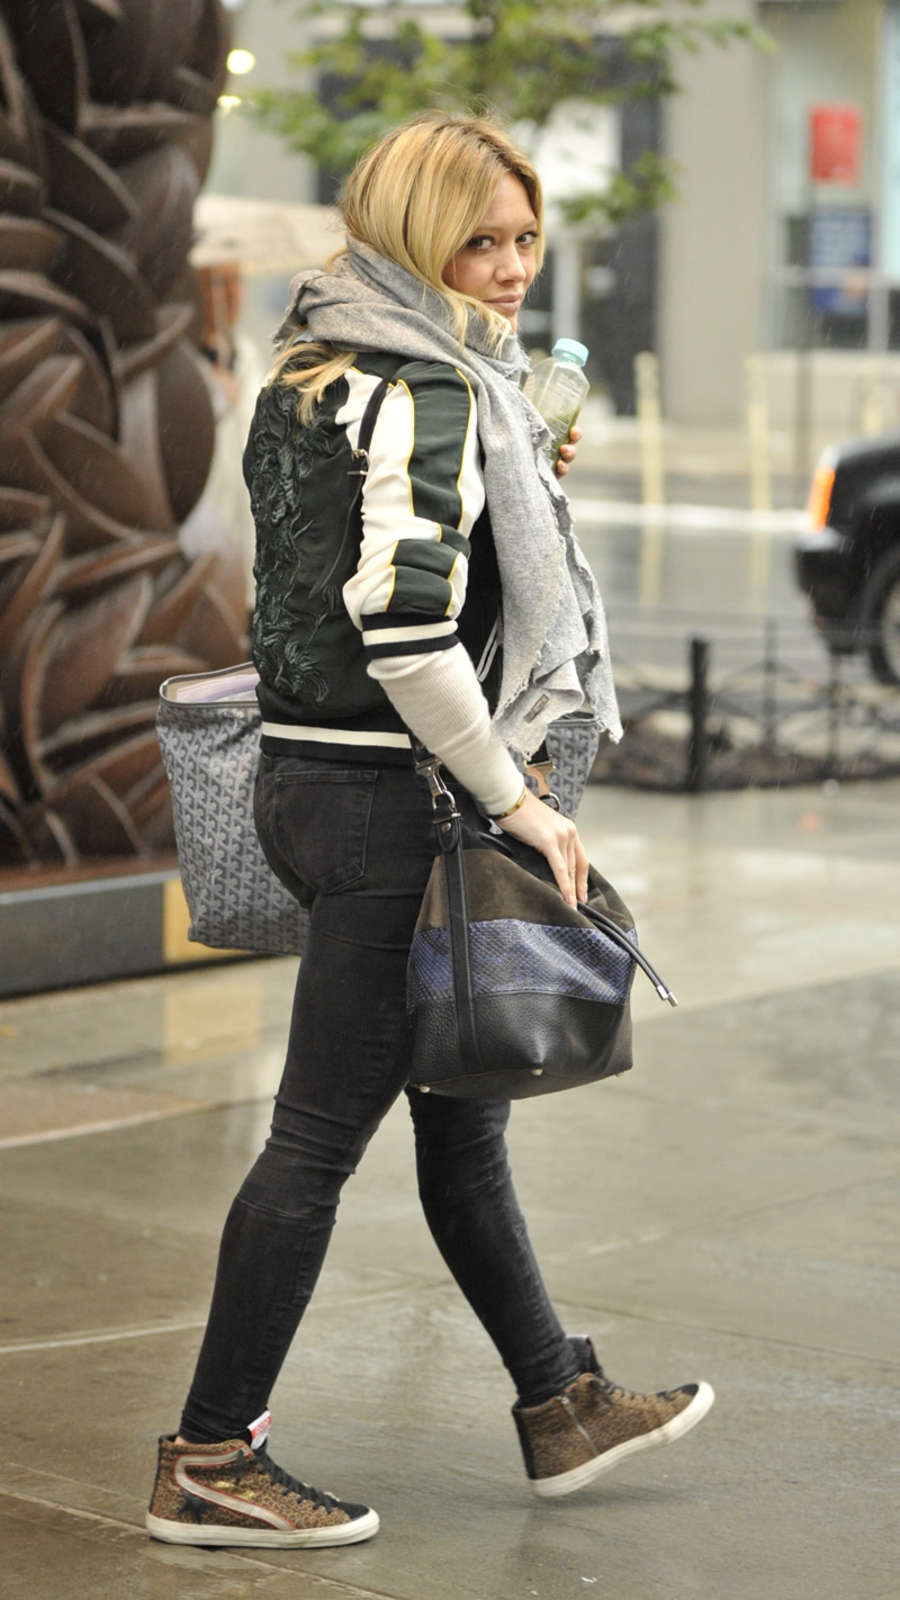 Hilary Duff in Tight jeans Leaving her hotel in New York